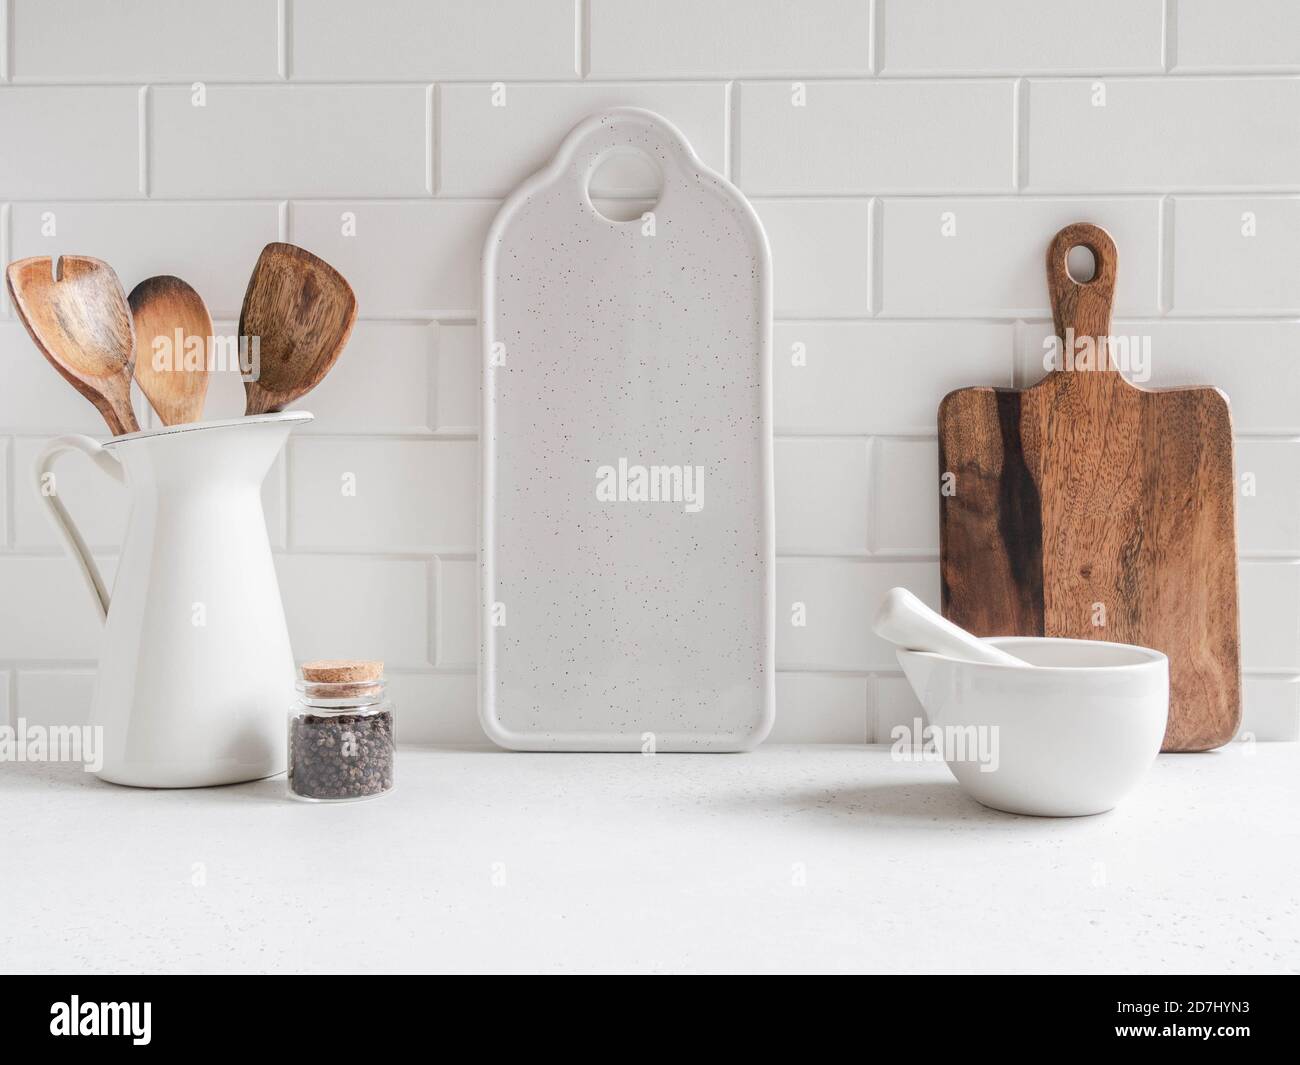 Stylish white kitchen background with kitchen utensils and whie ceramic board for text on white countertop, copy space, front view Stock Photo